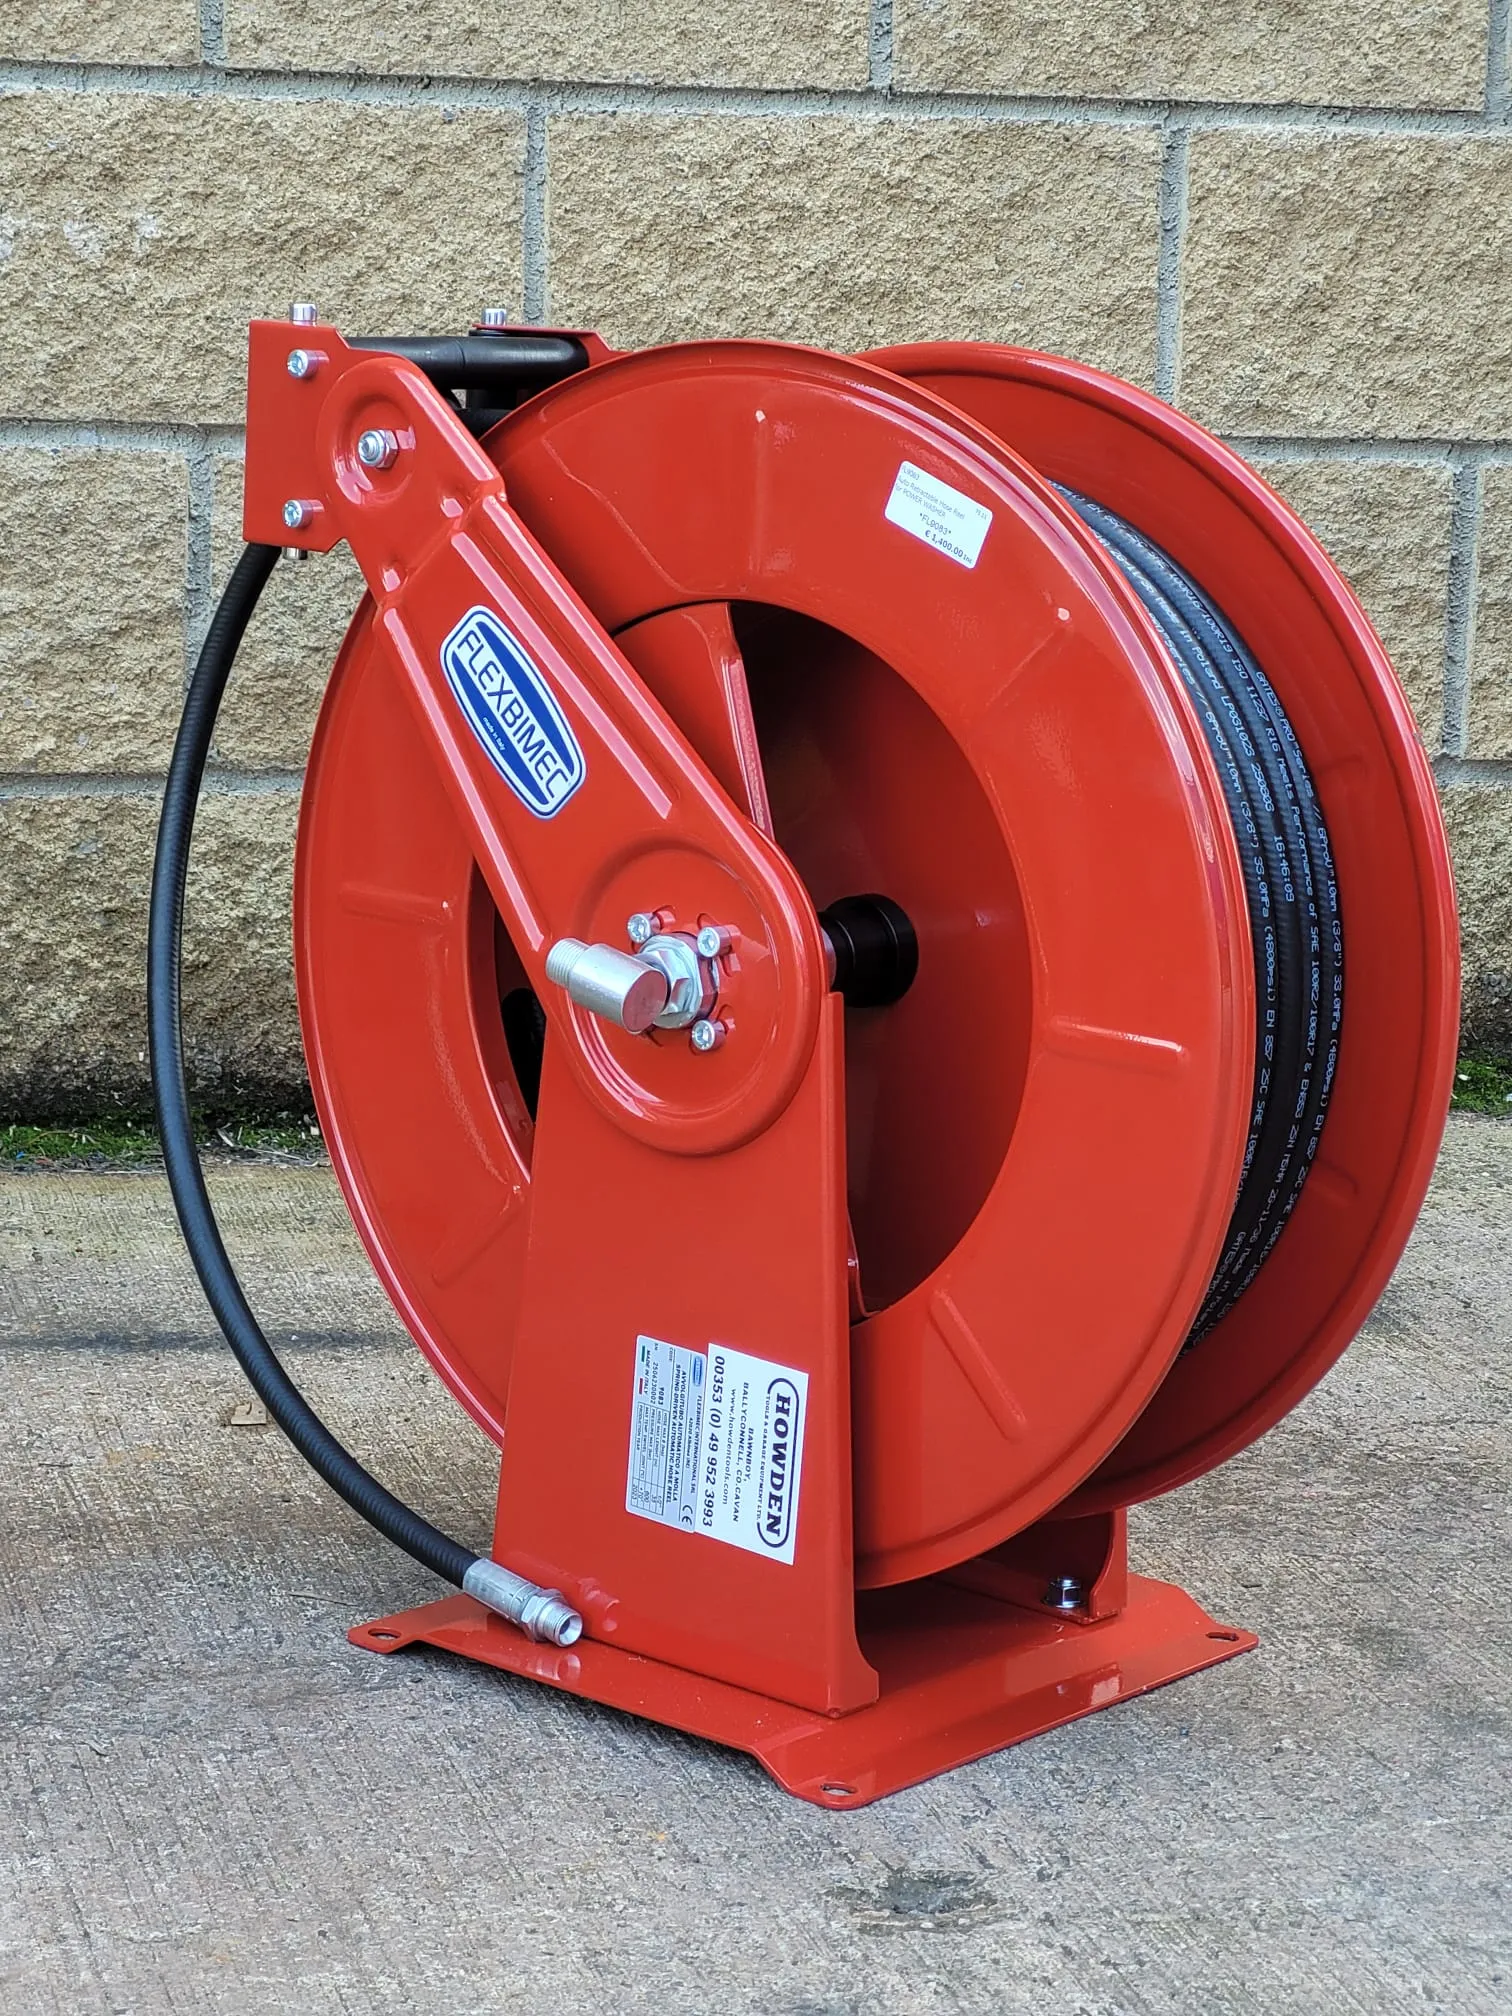 Auto Retractable Hose Reel for POWER WASHER